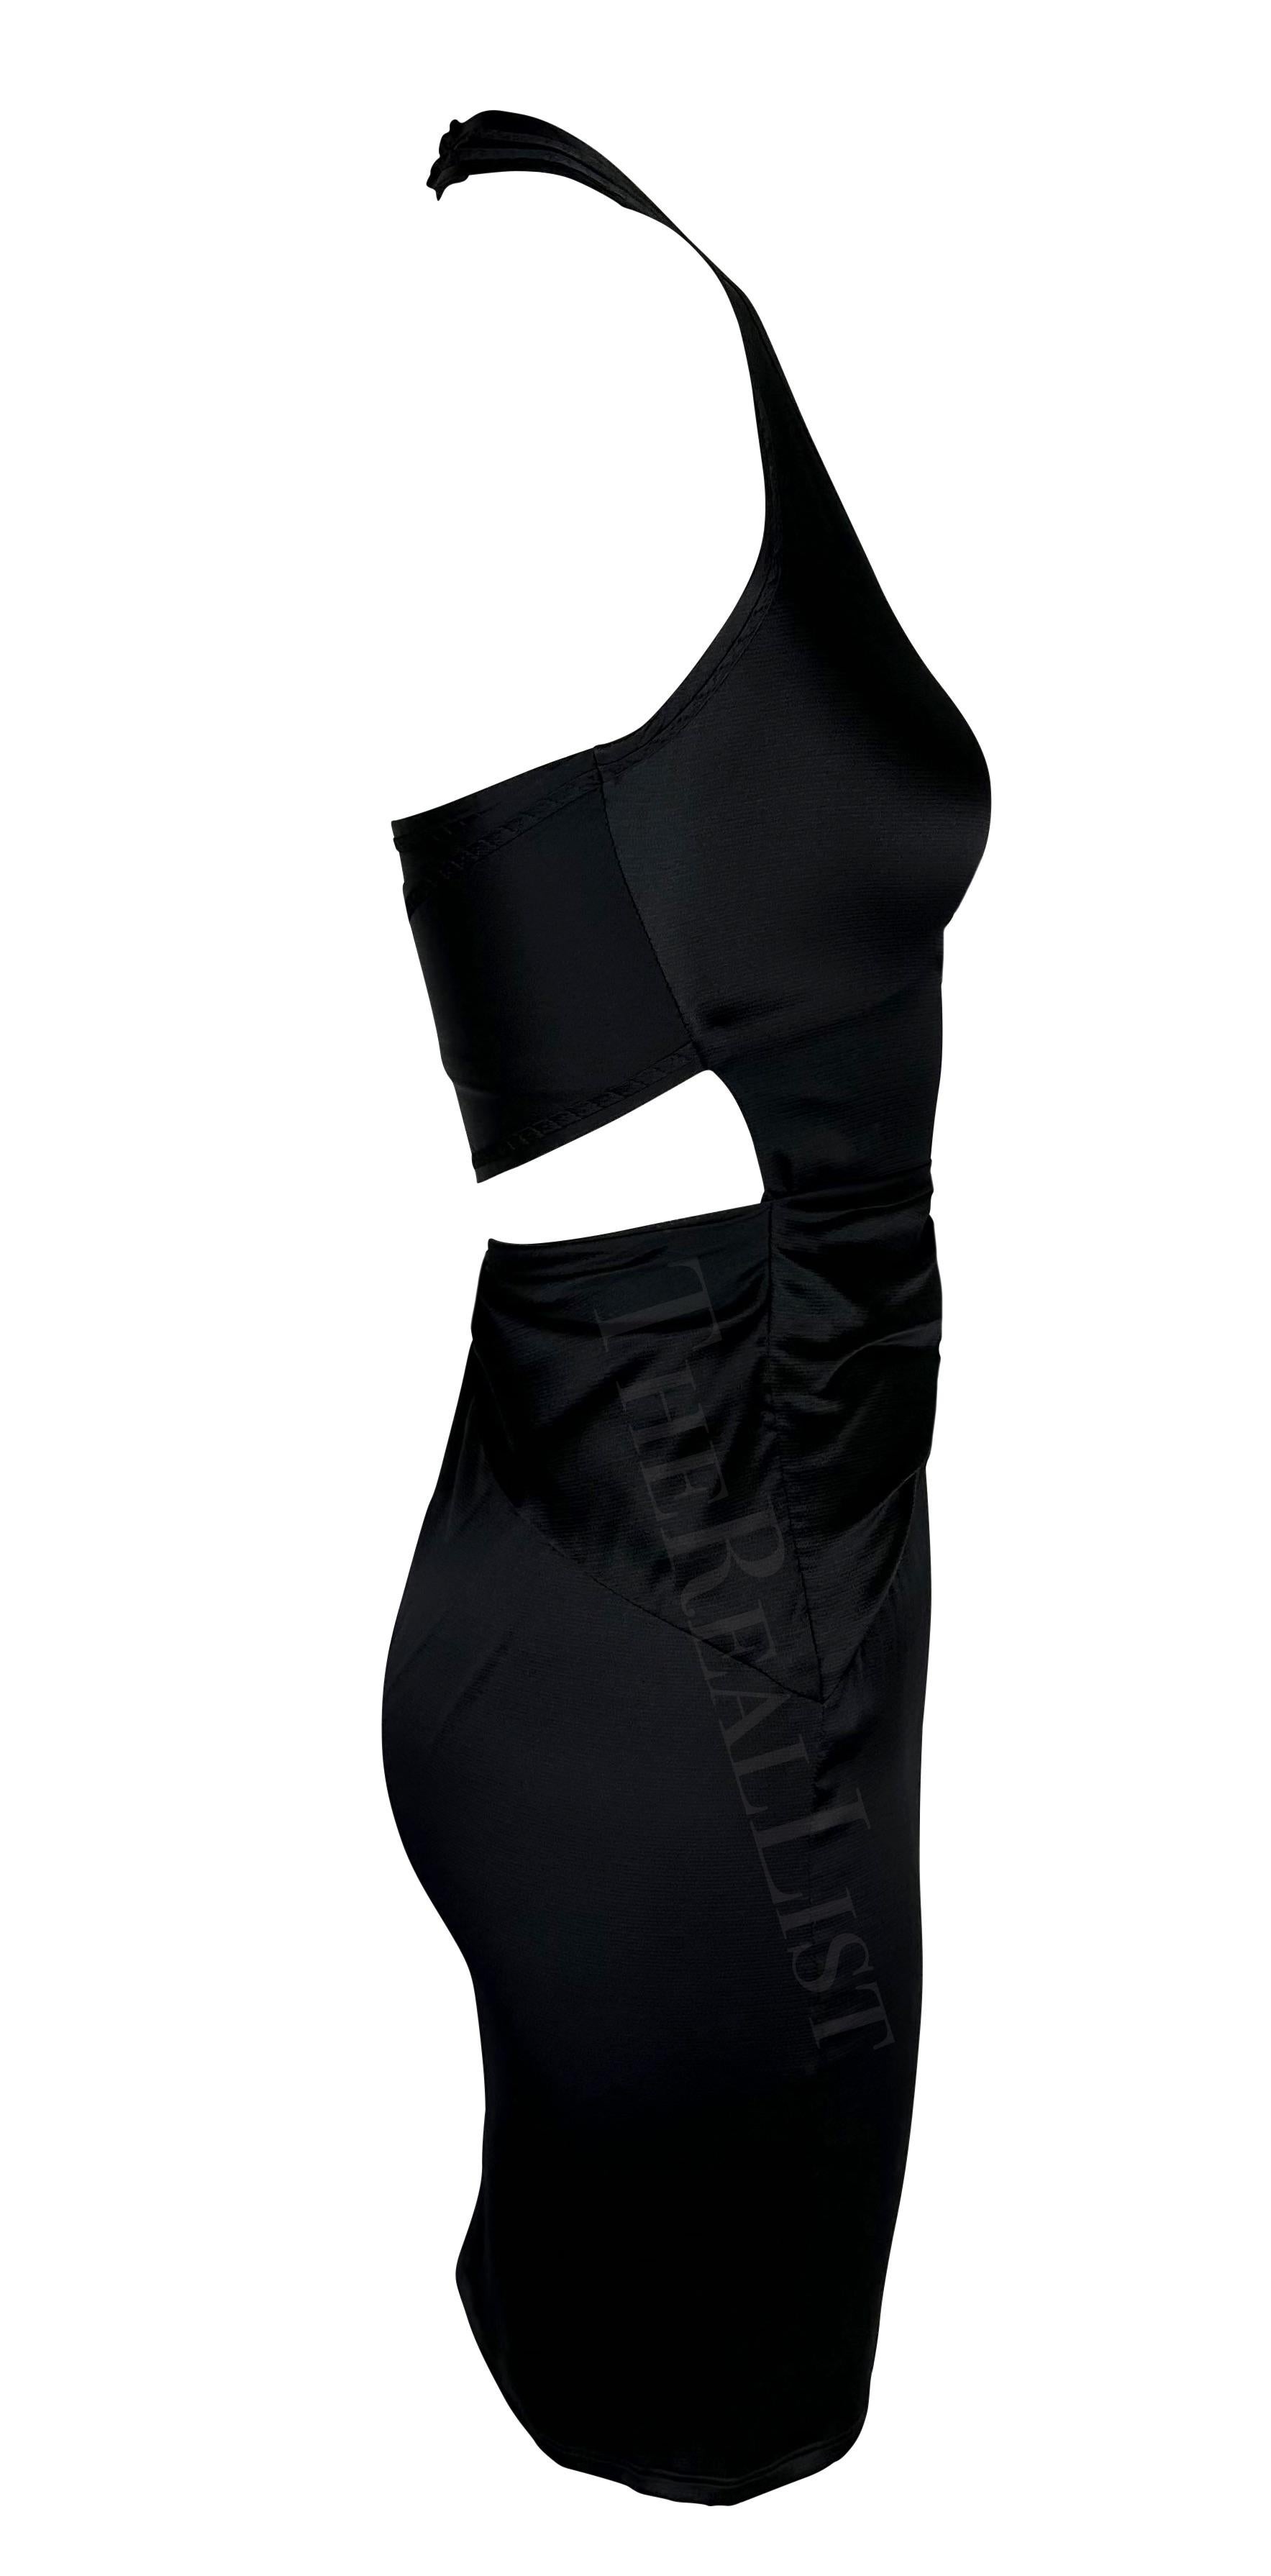 Presenting a black satin Gucci halterneck mini dress, designed by Alessandra Facchinetti. From the Spring/Summer 2005 collection, this dress features gathering at the front, cutouts at the back, and a concealed zipper at the side.

Approximate